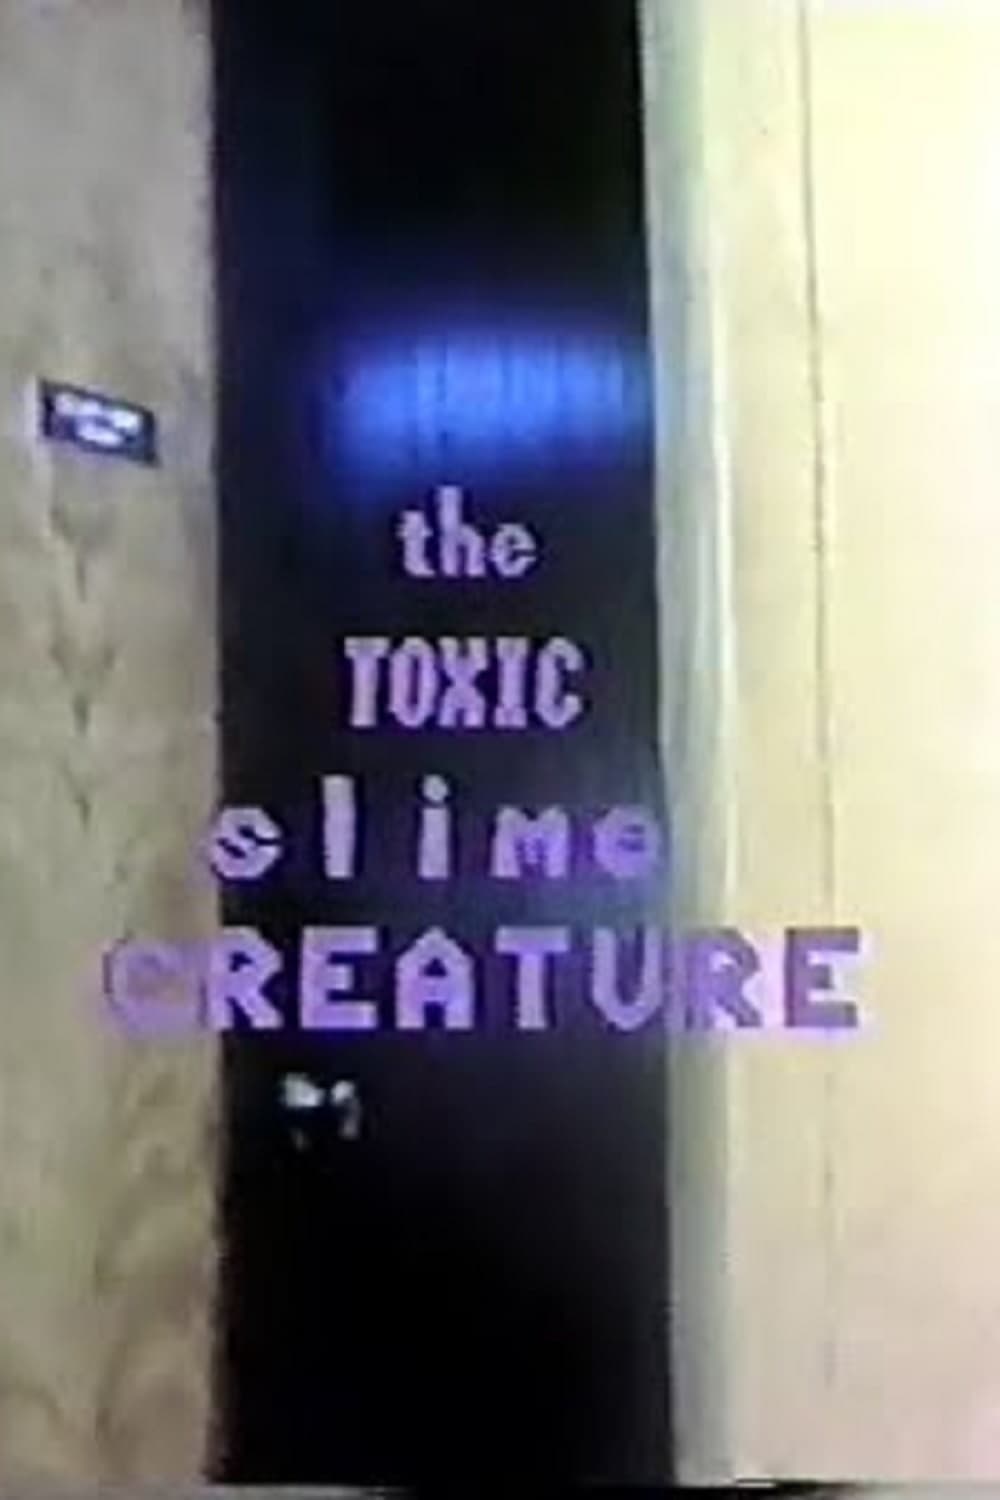 The Toxic Slime Creature